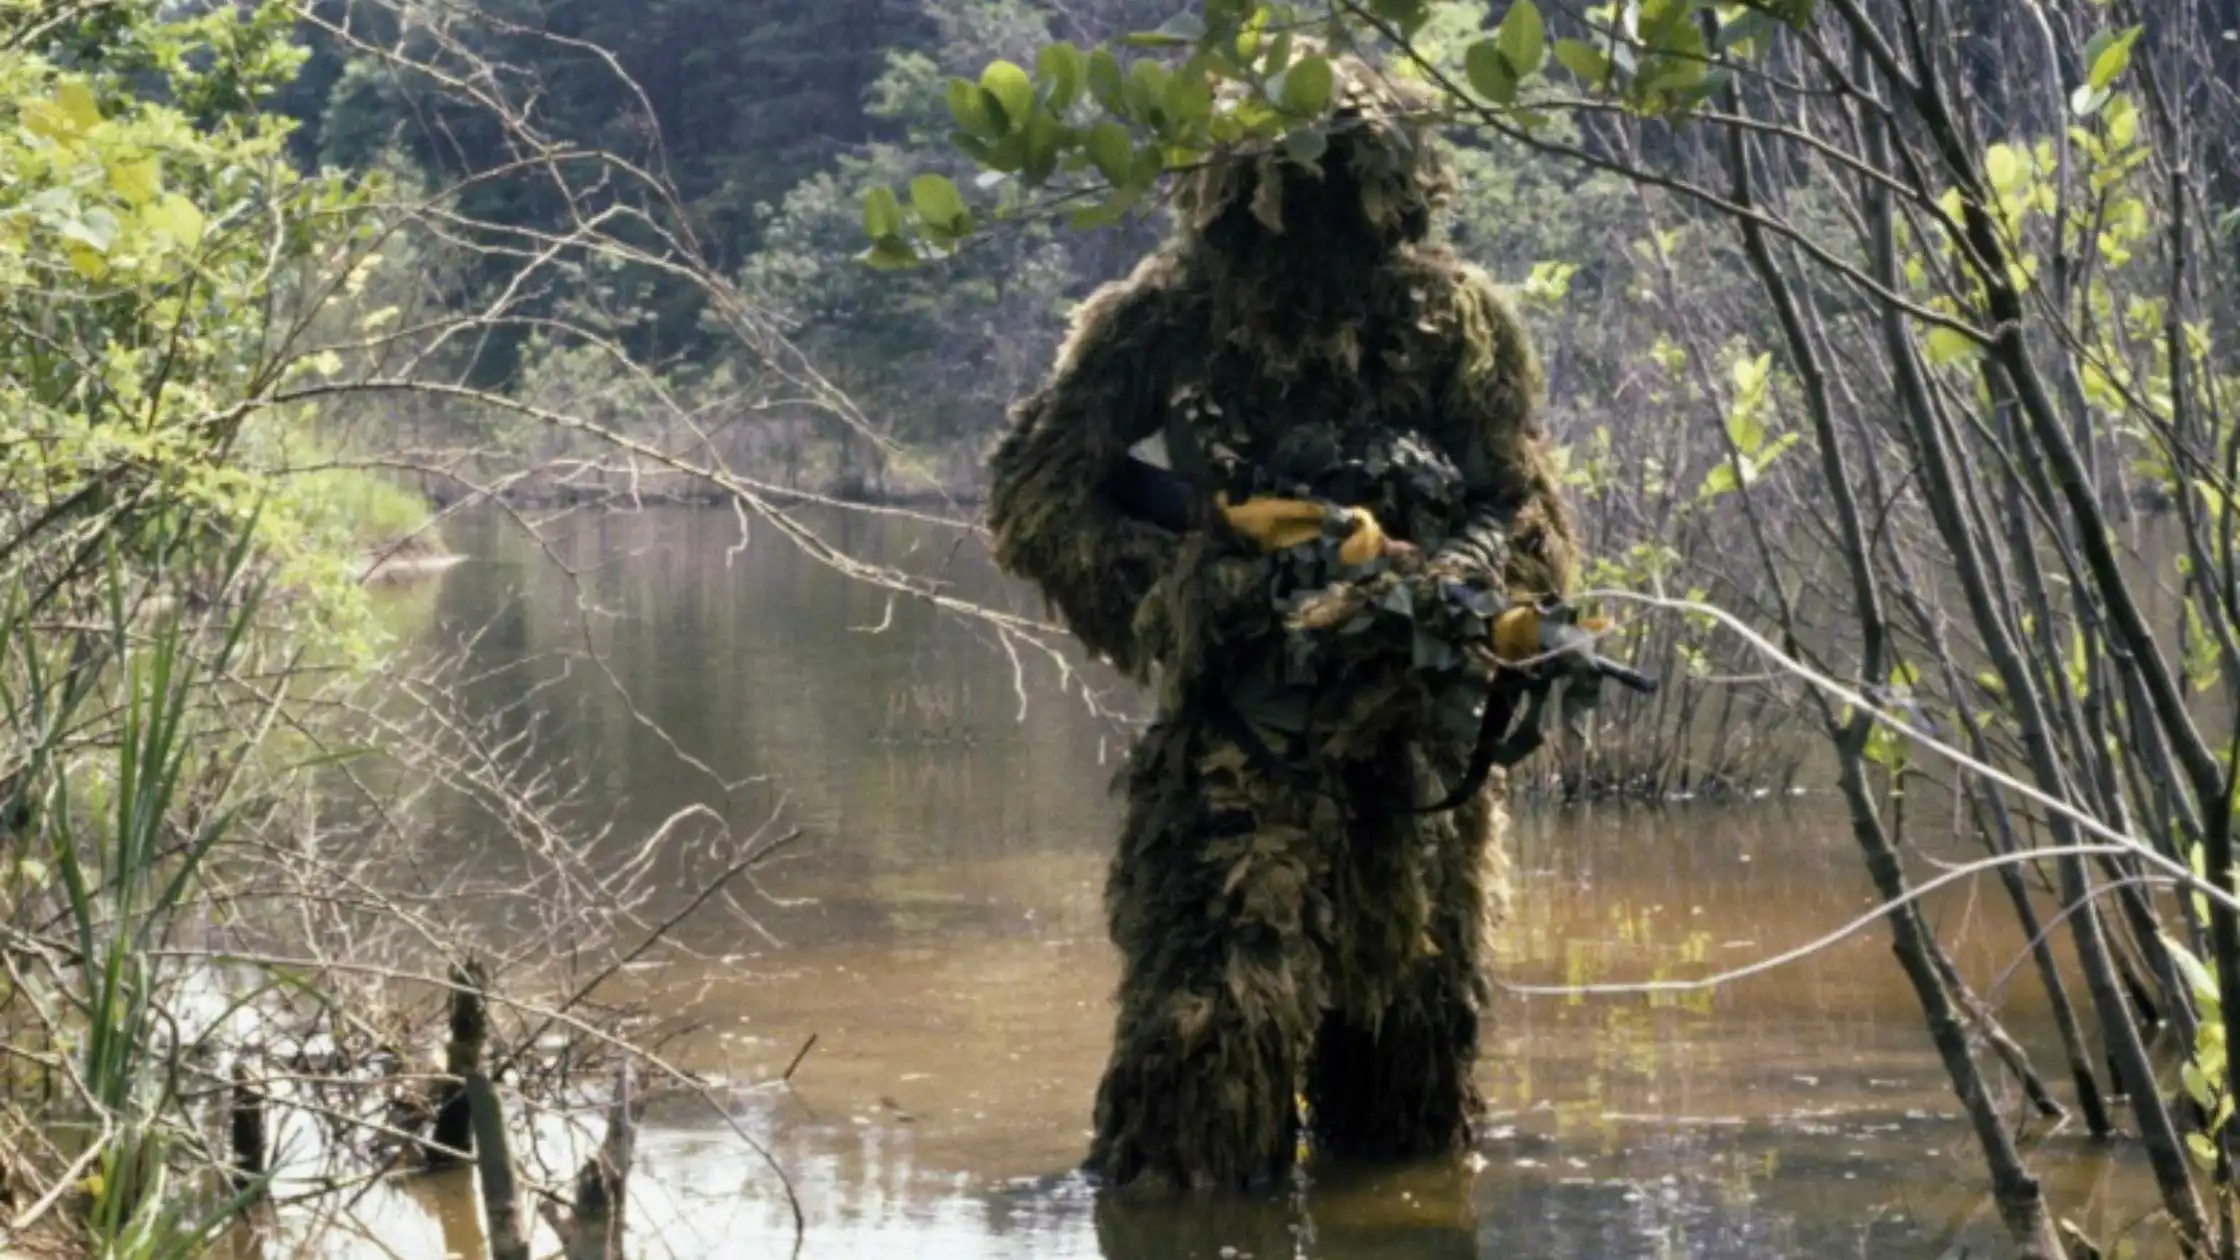 U.S Army Researchers Working on Hemp Based Camouflage Uniforms for Snipers